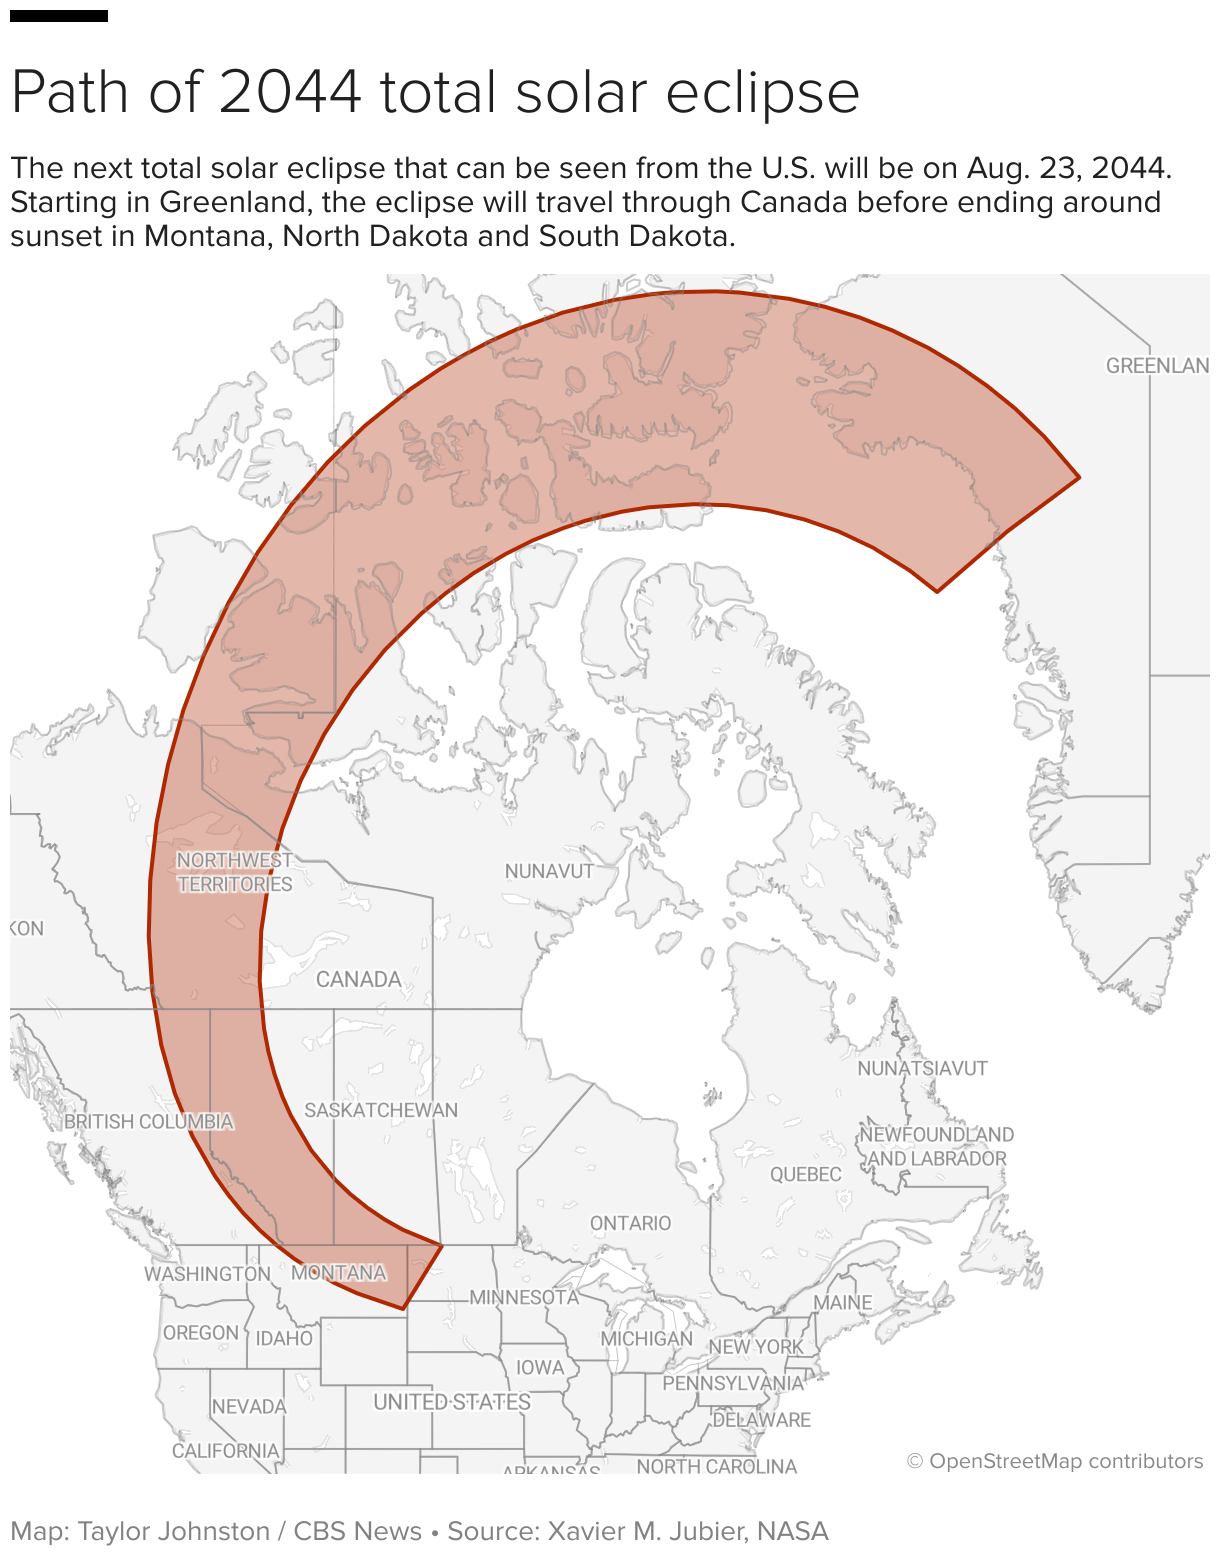 Map showing the path of the 2044 total solar eclipse from Greenland, Canada, and parts of the United States.